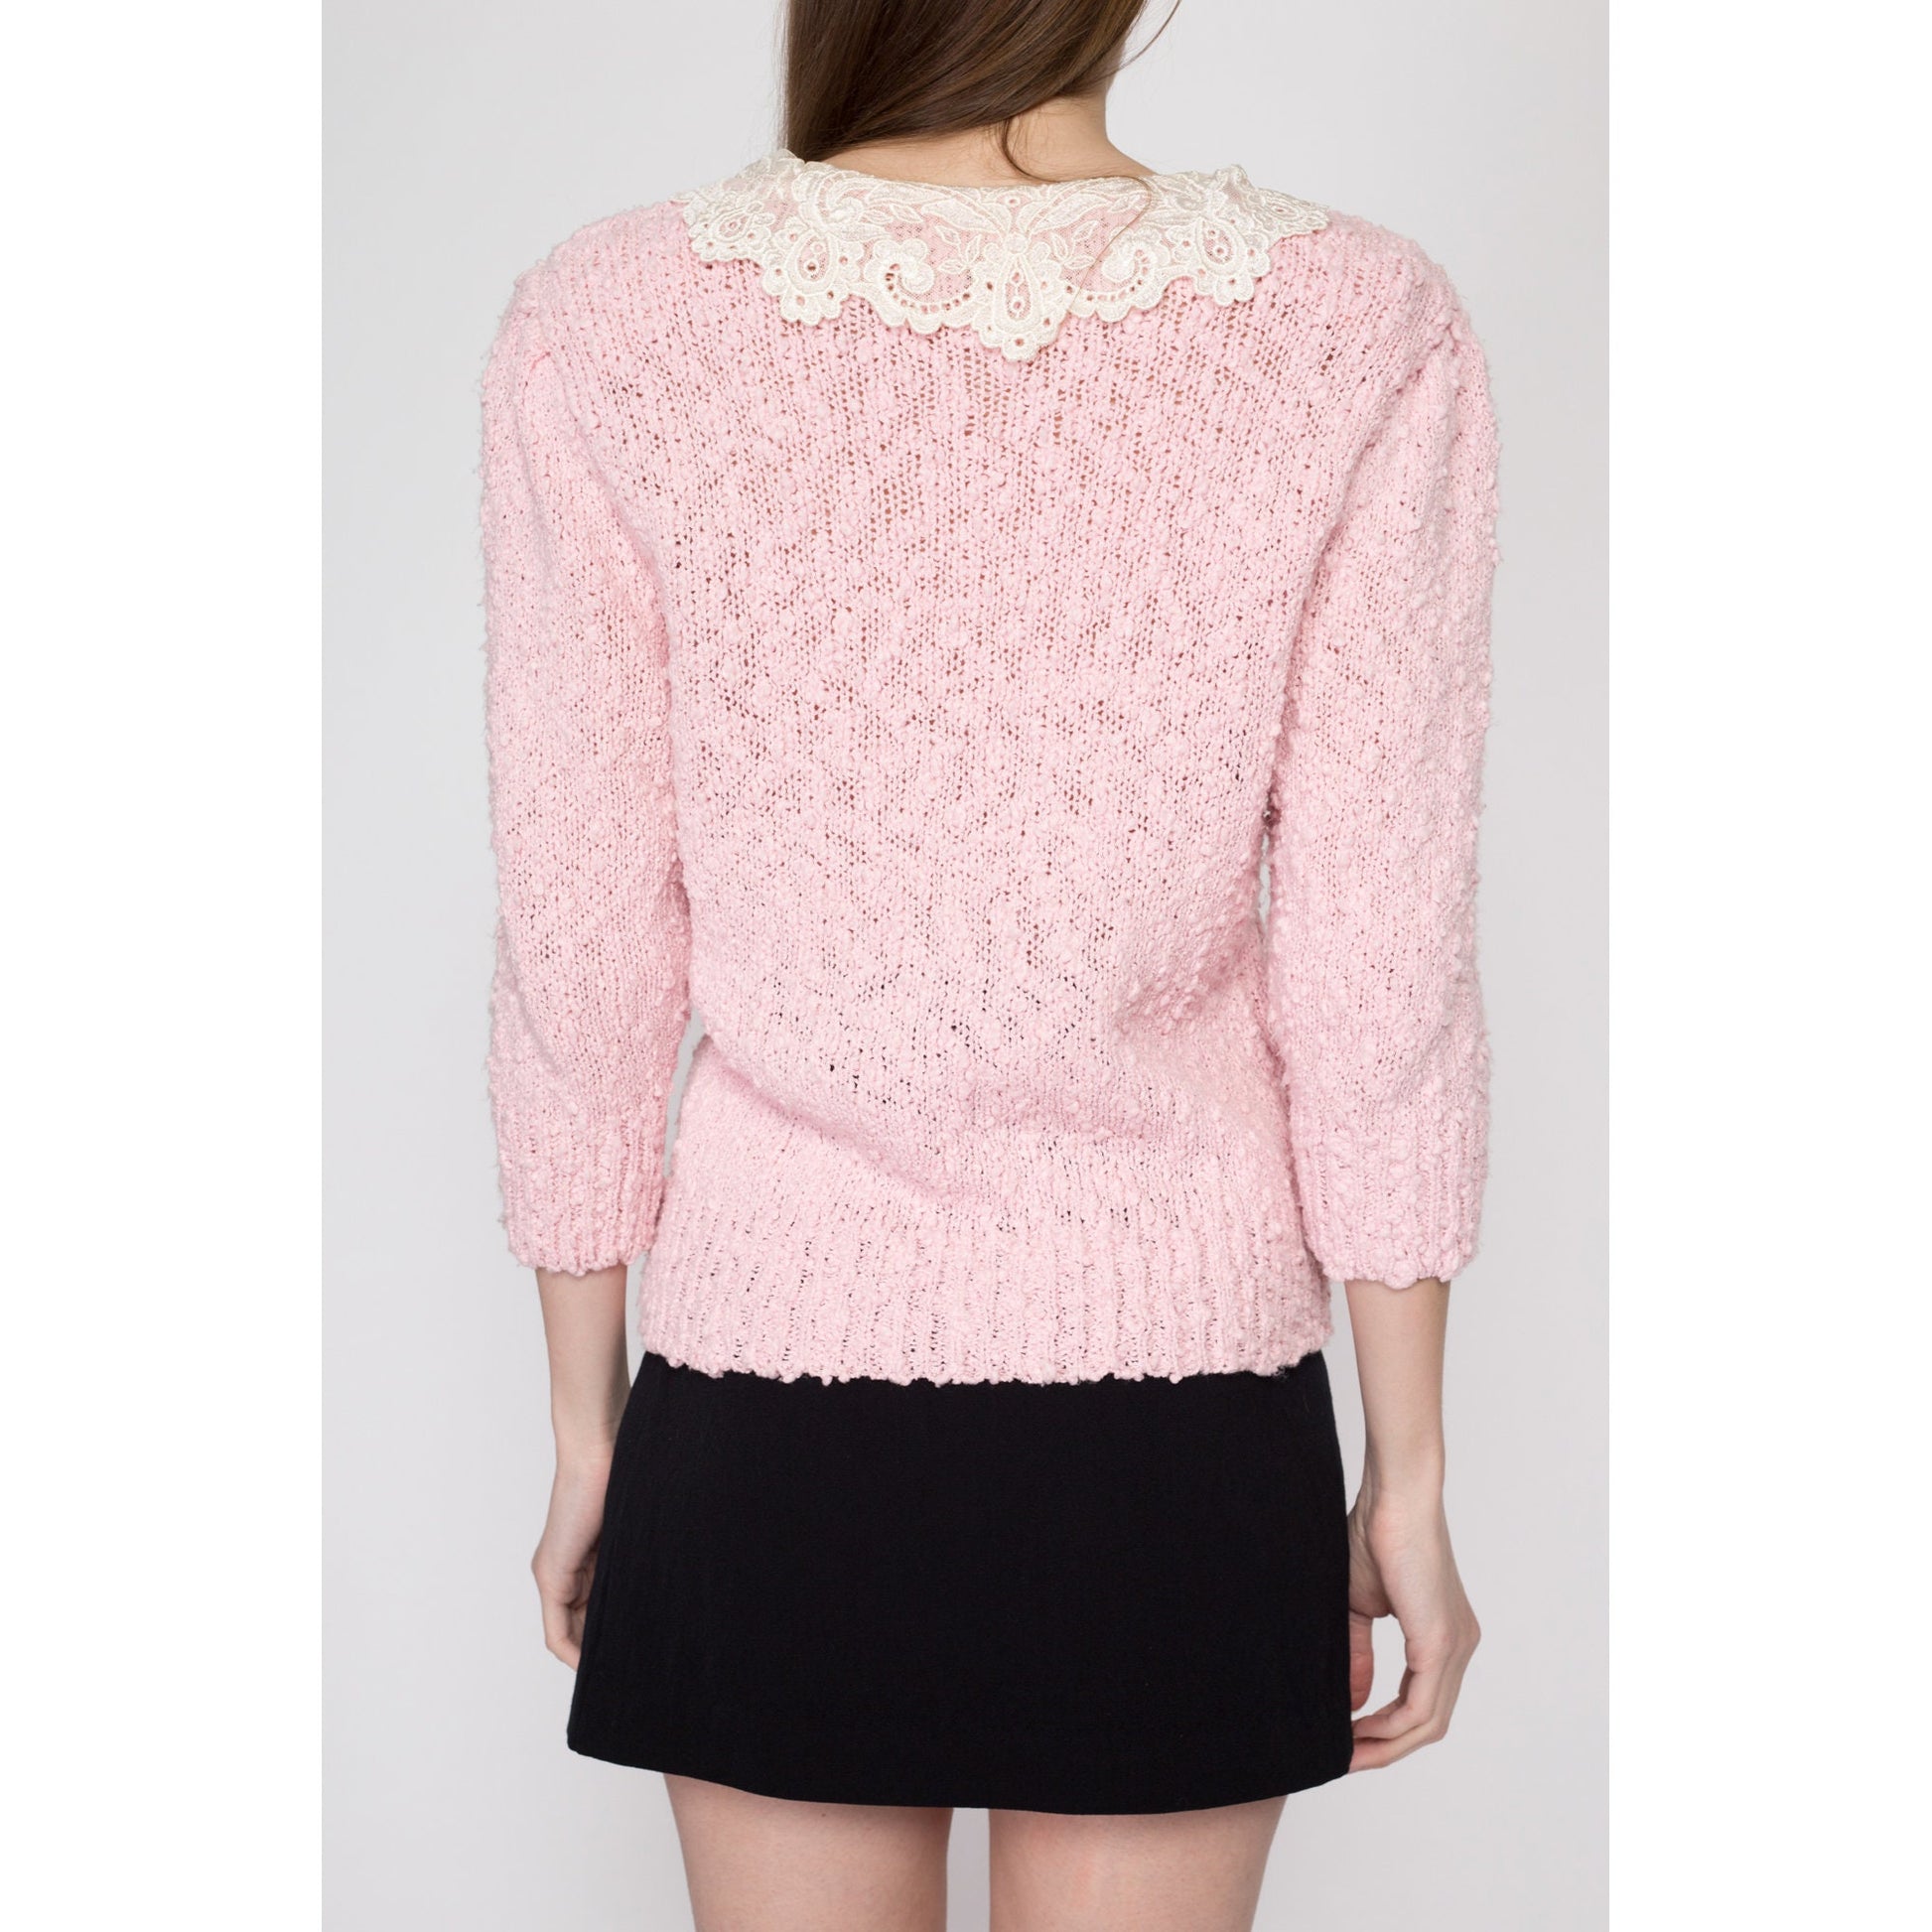 Medium 80s Pink Lace Collar Boucle Knit Sweater | Cute Retro Vintage 3/4 Sleeve Girly Pullover